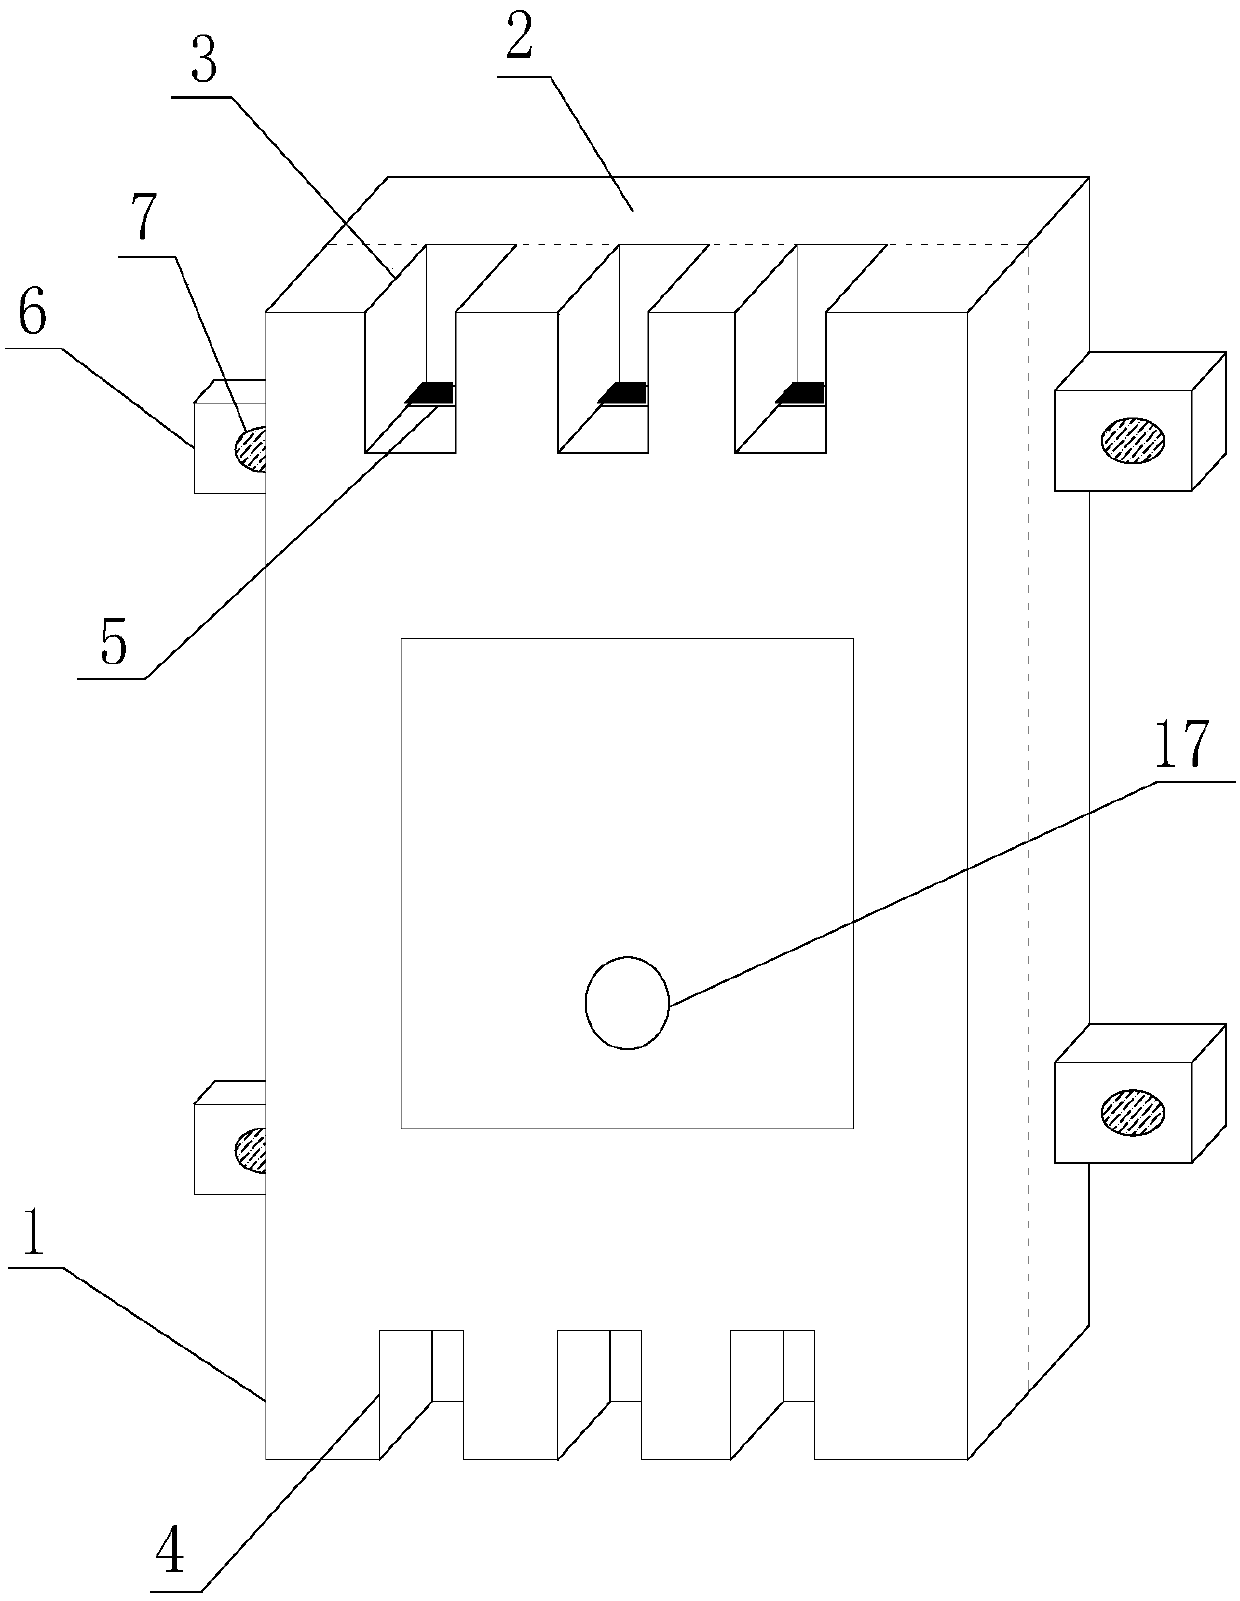 A circuit breaker with self-locking function